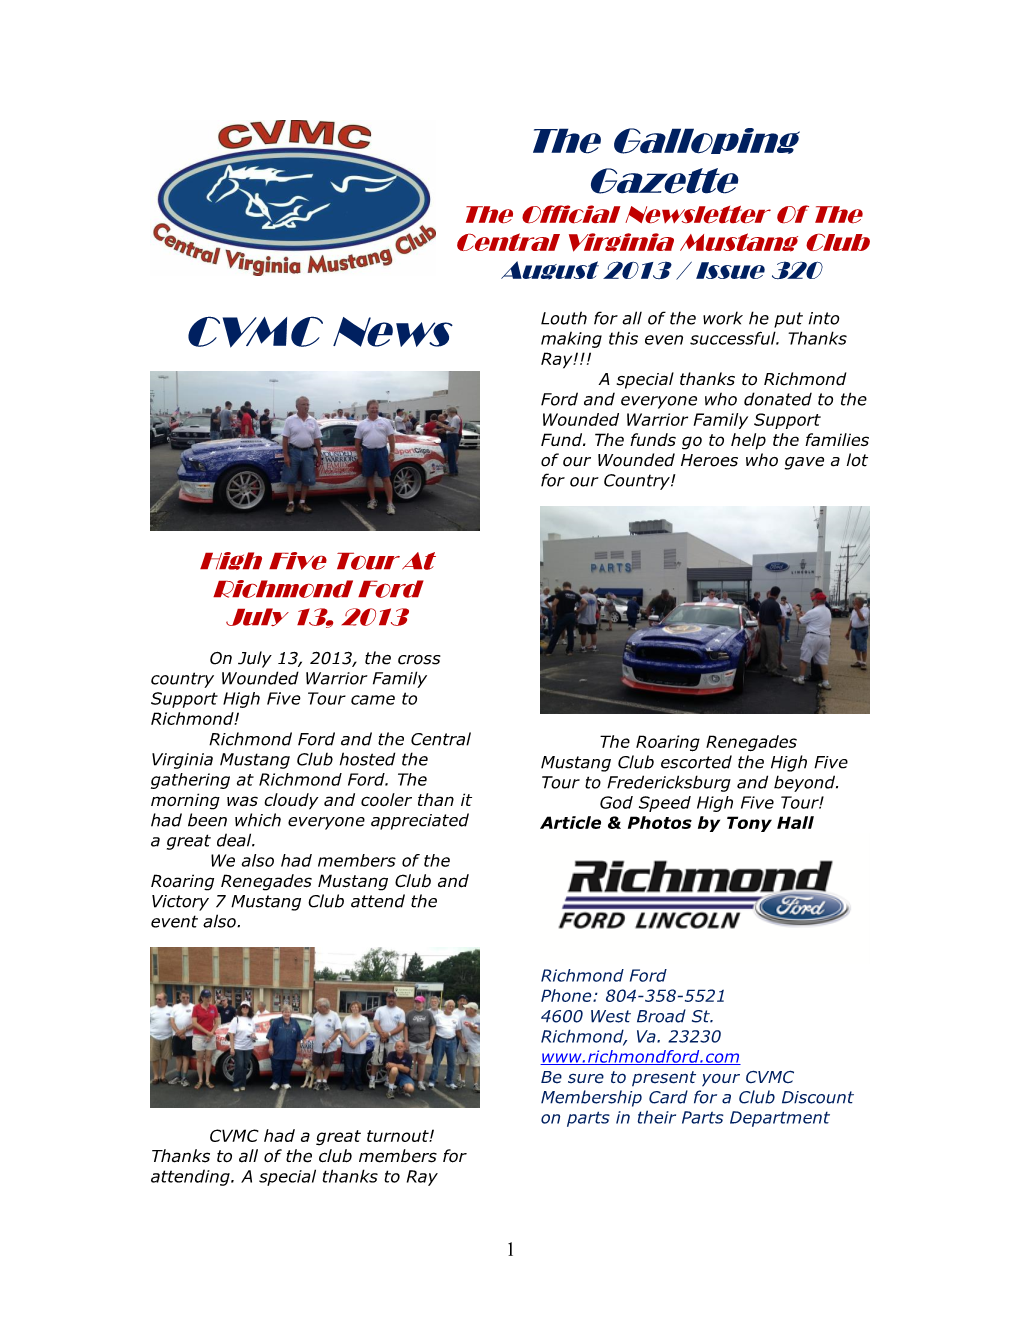 The Galloping Gazette the Official Newsletter of the Central Virginia Mustang Club August 2013 / Issue 320